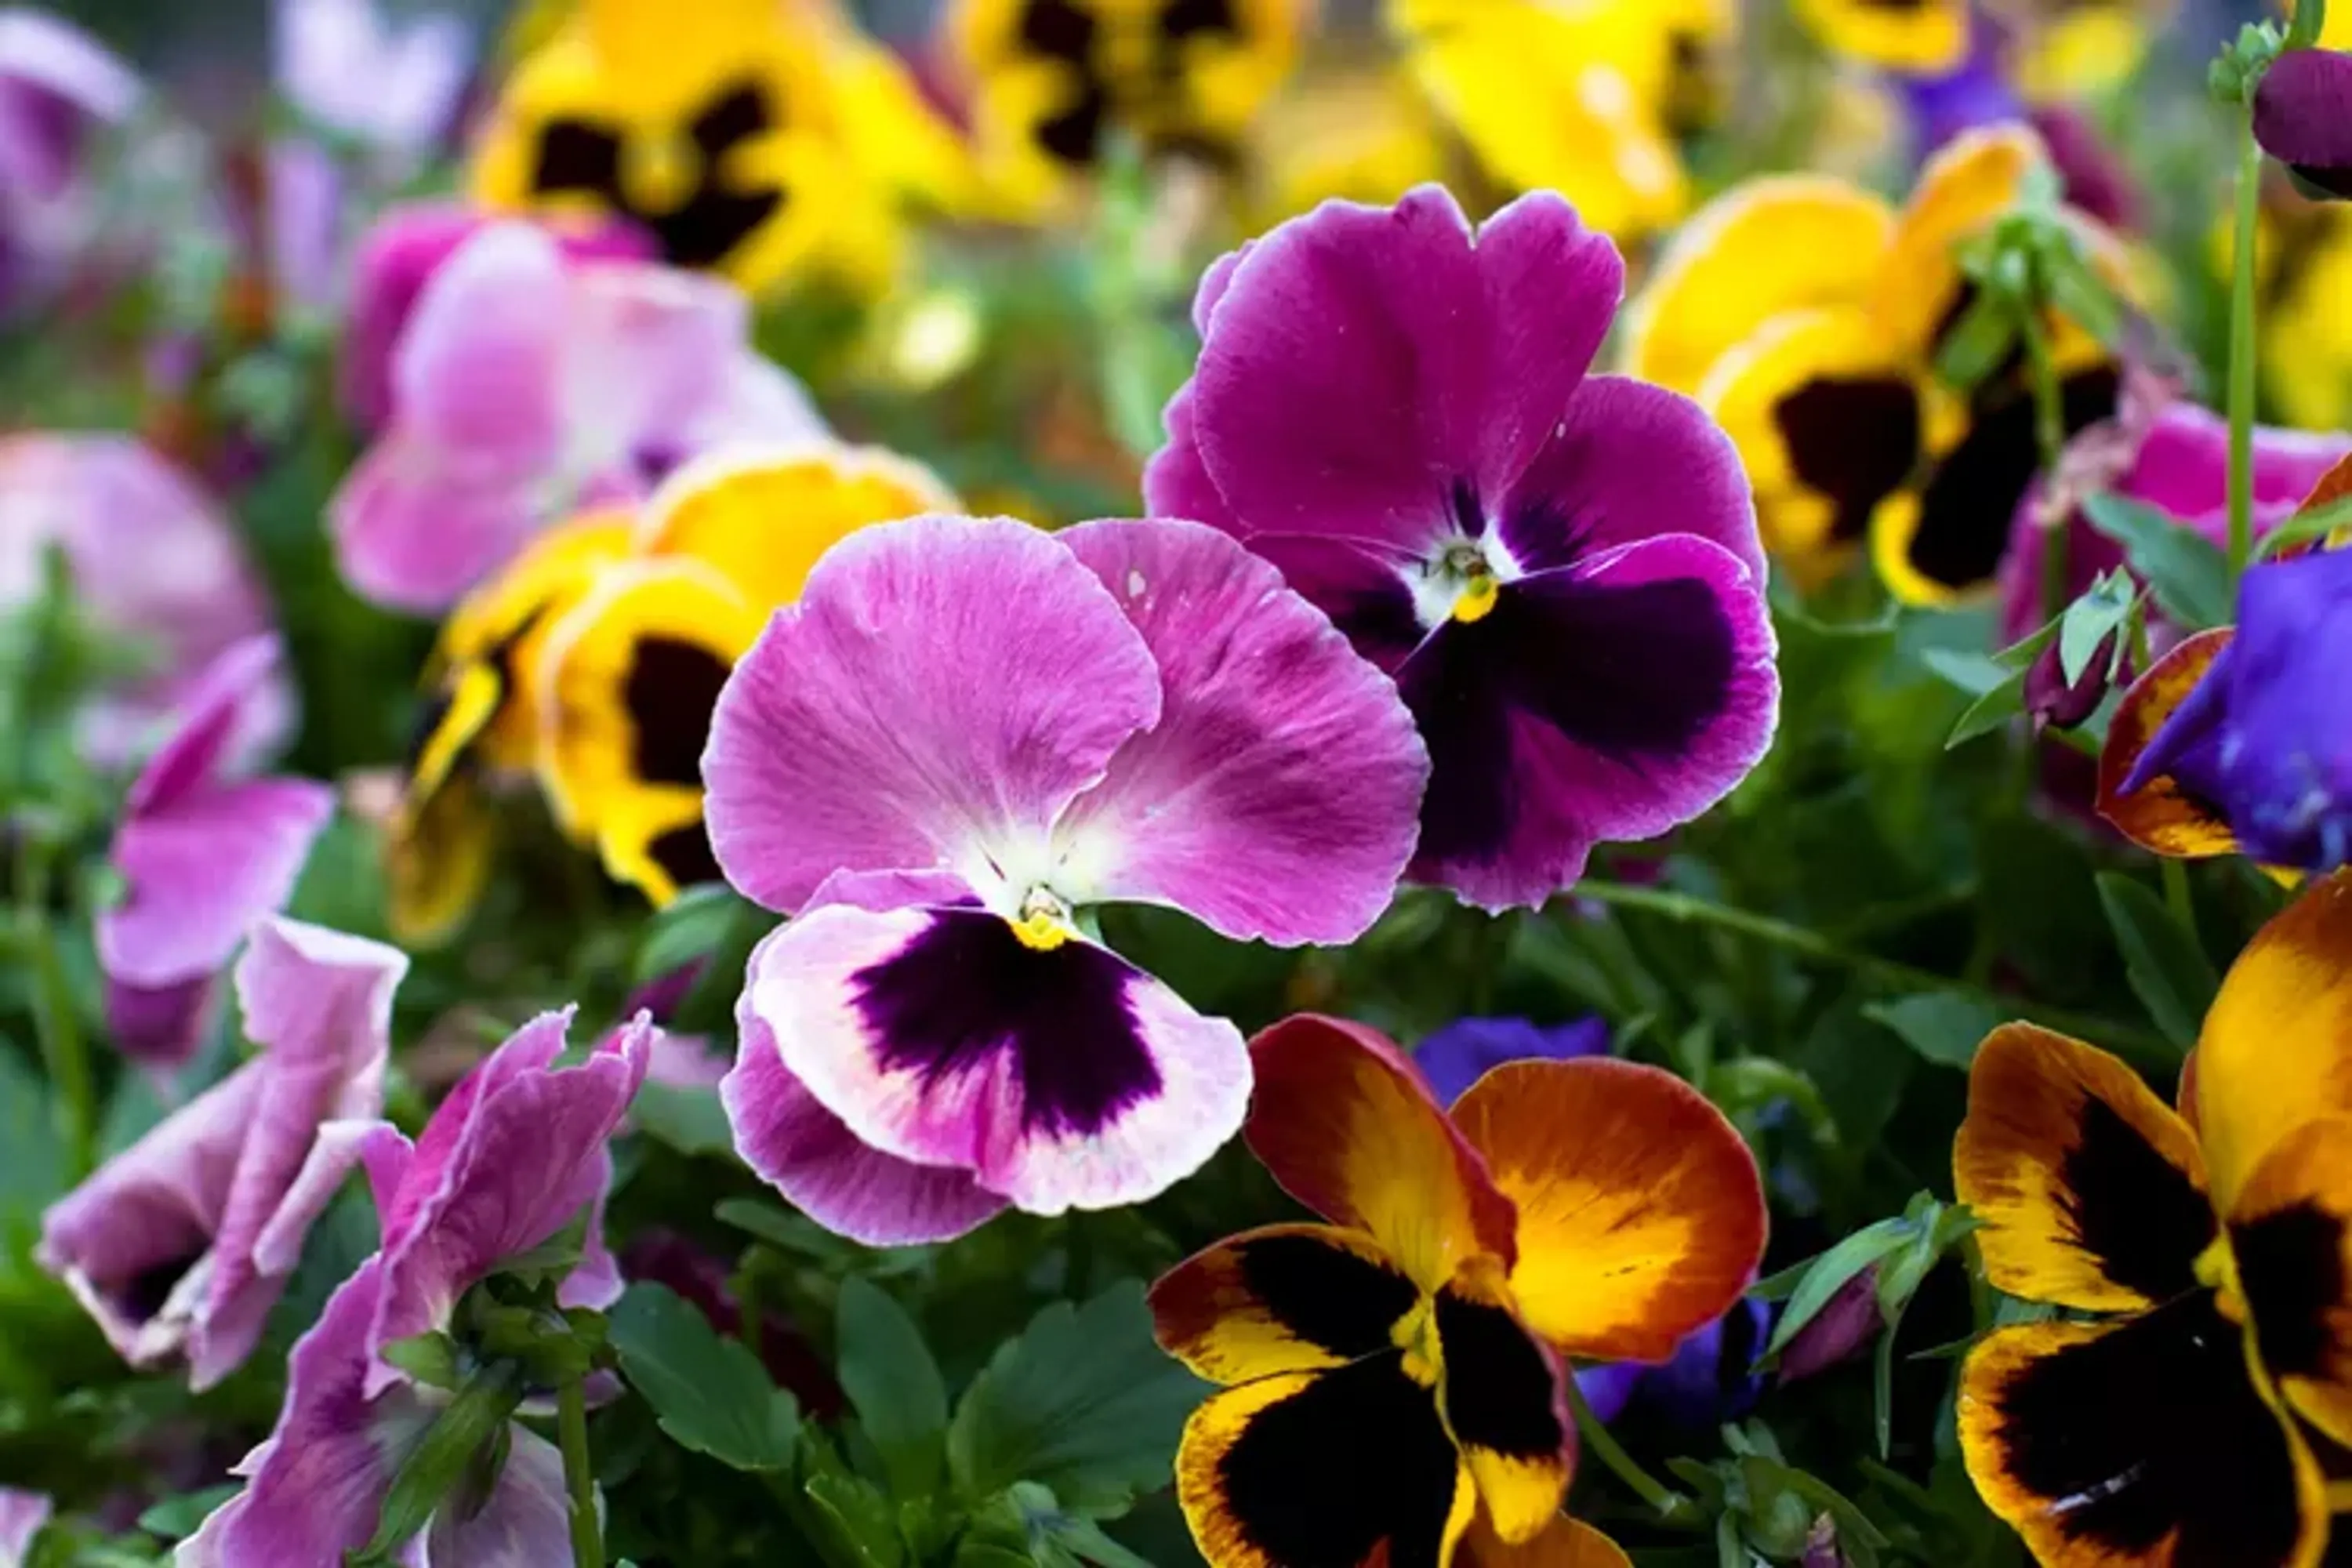 03 cool wave pansy colorful flowers cool wave pansy getty 0723 b3f0dffcfe854216bf15d2c69c841b05 copy